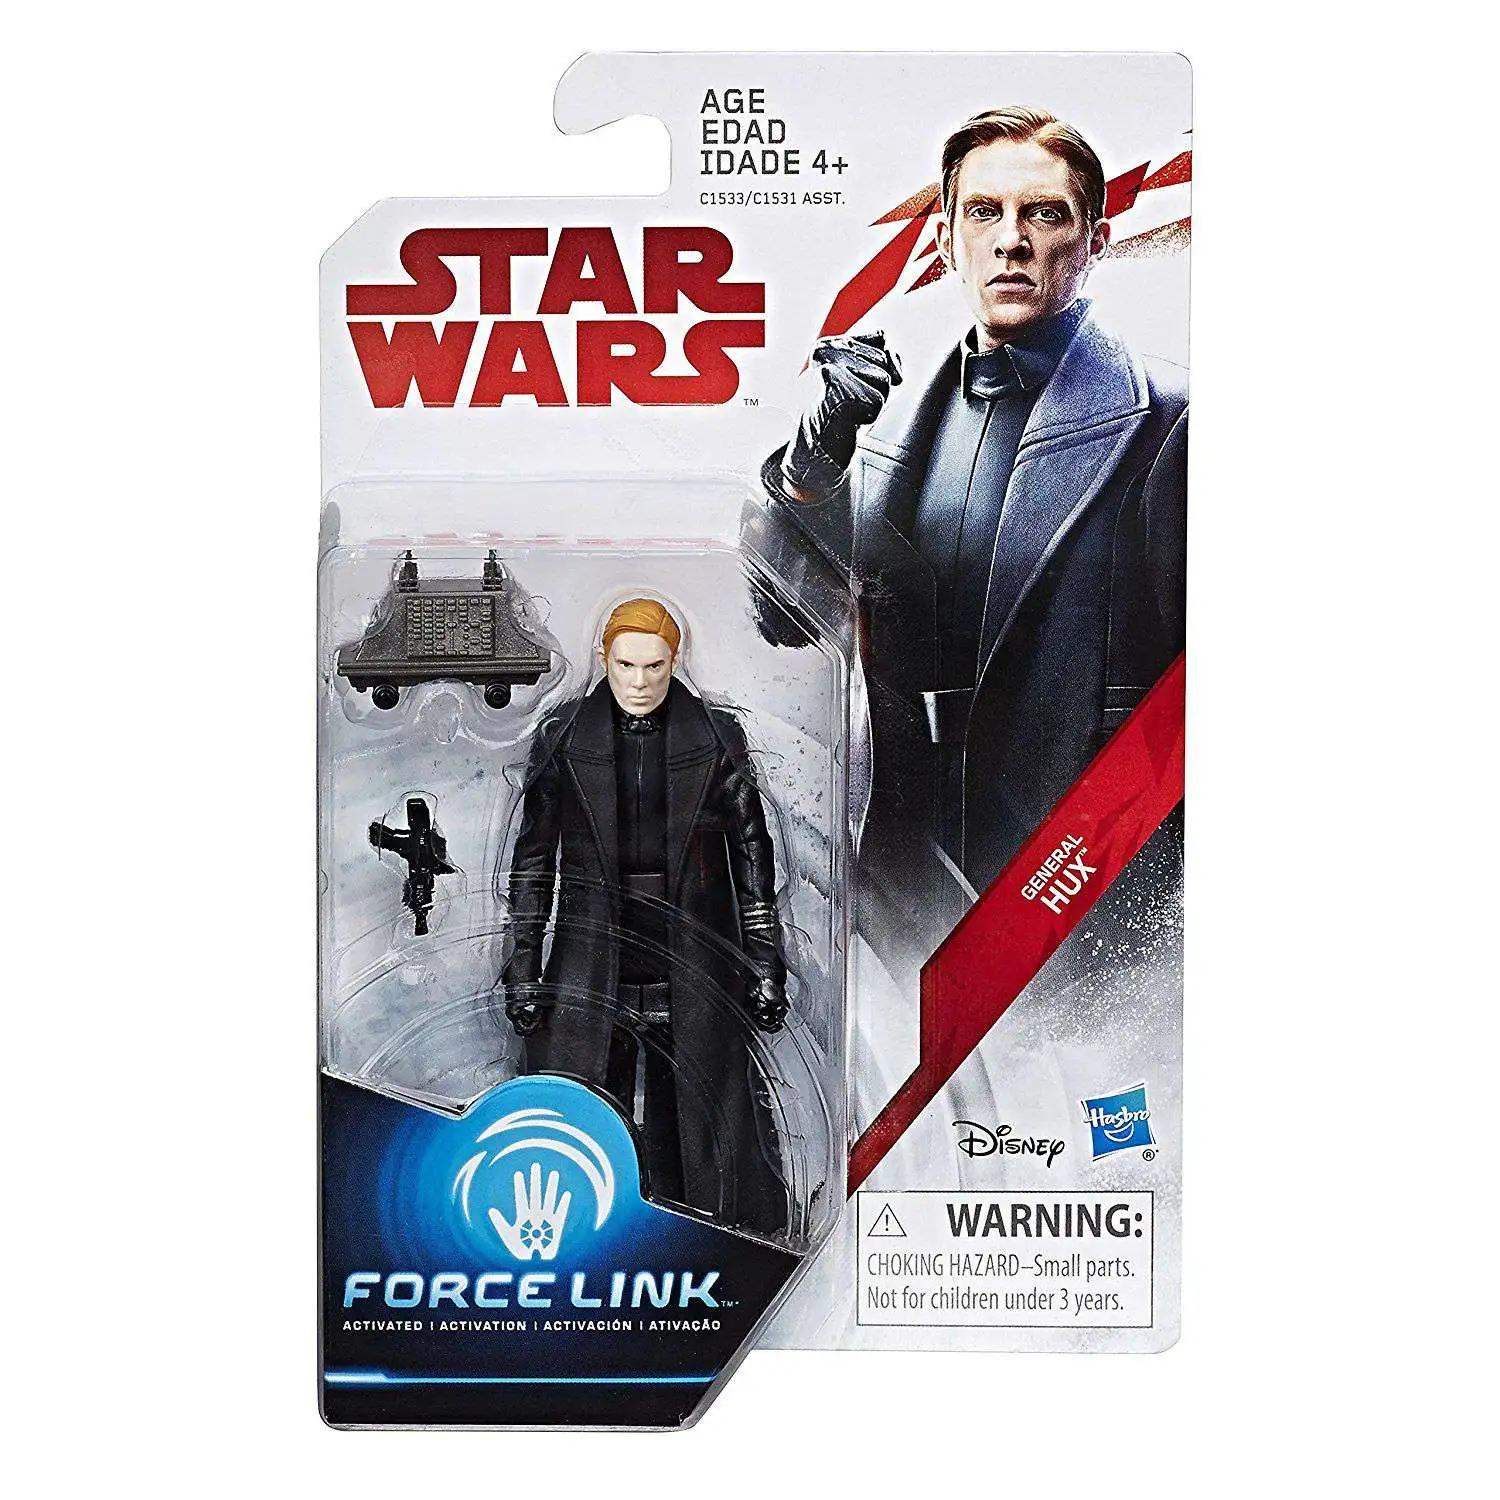 Poe Star Wars Force Link 3.75-Inch Action Figures Fin Leia Paige Hux Kylo 